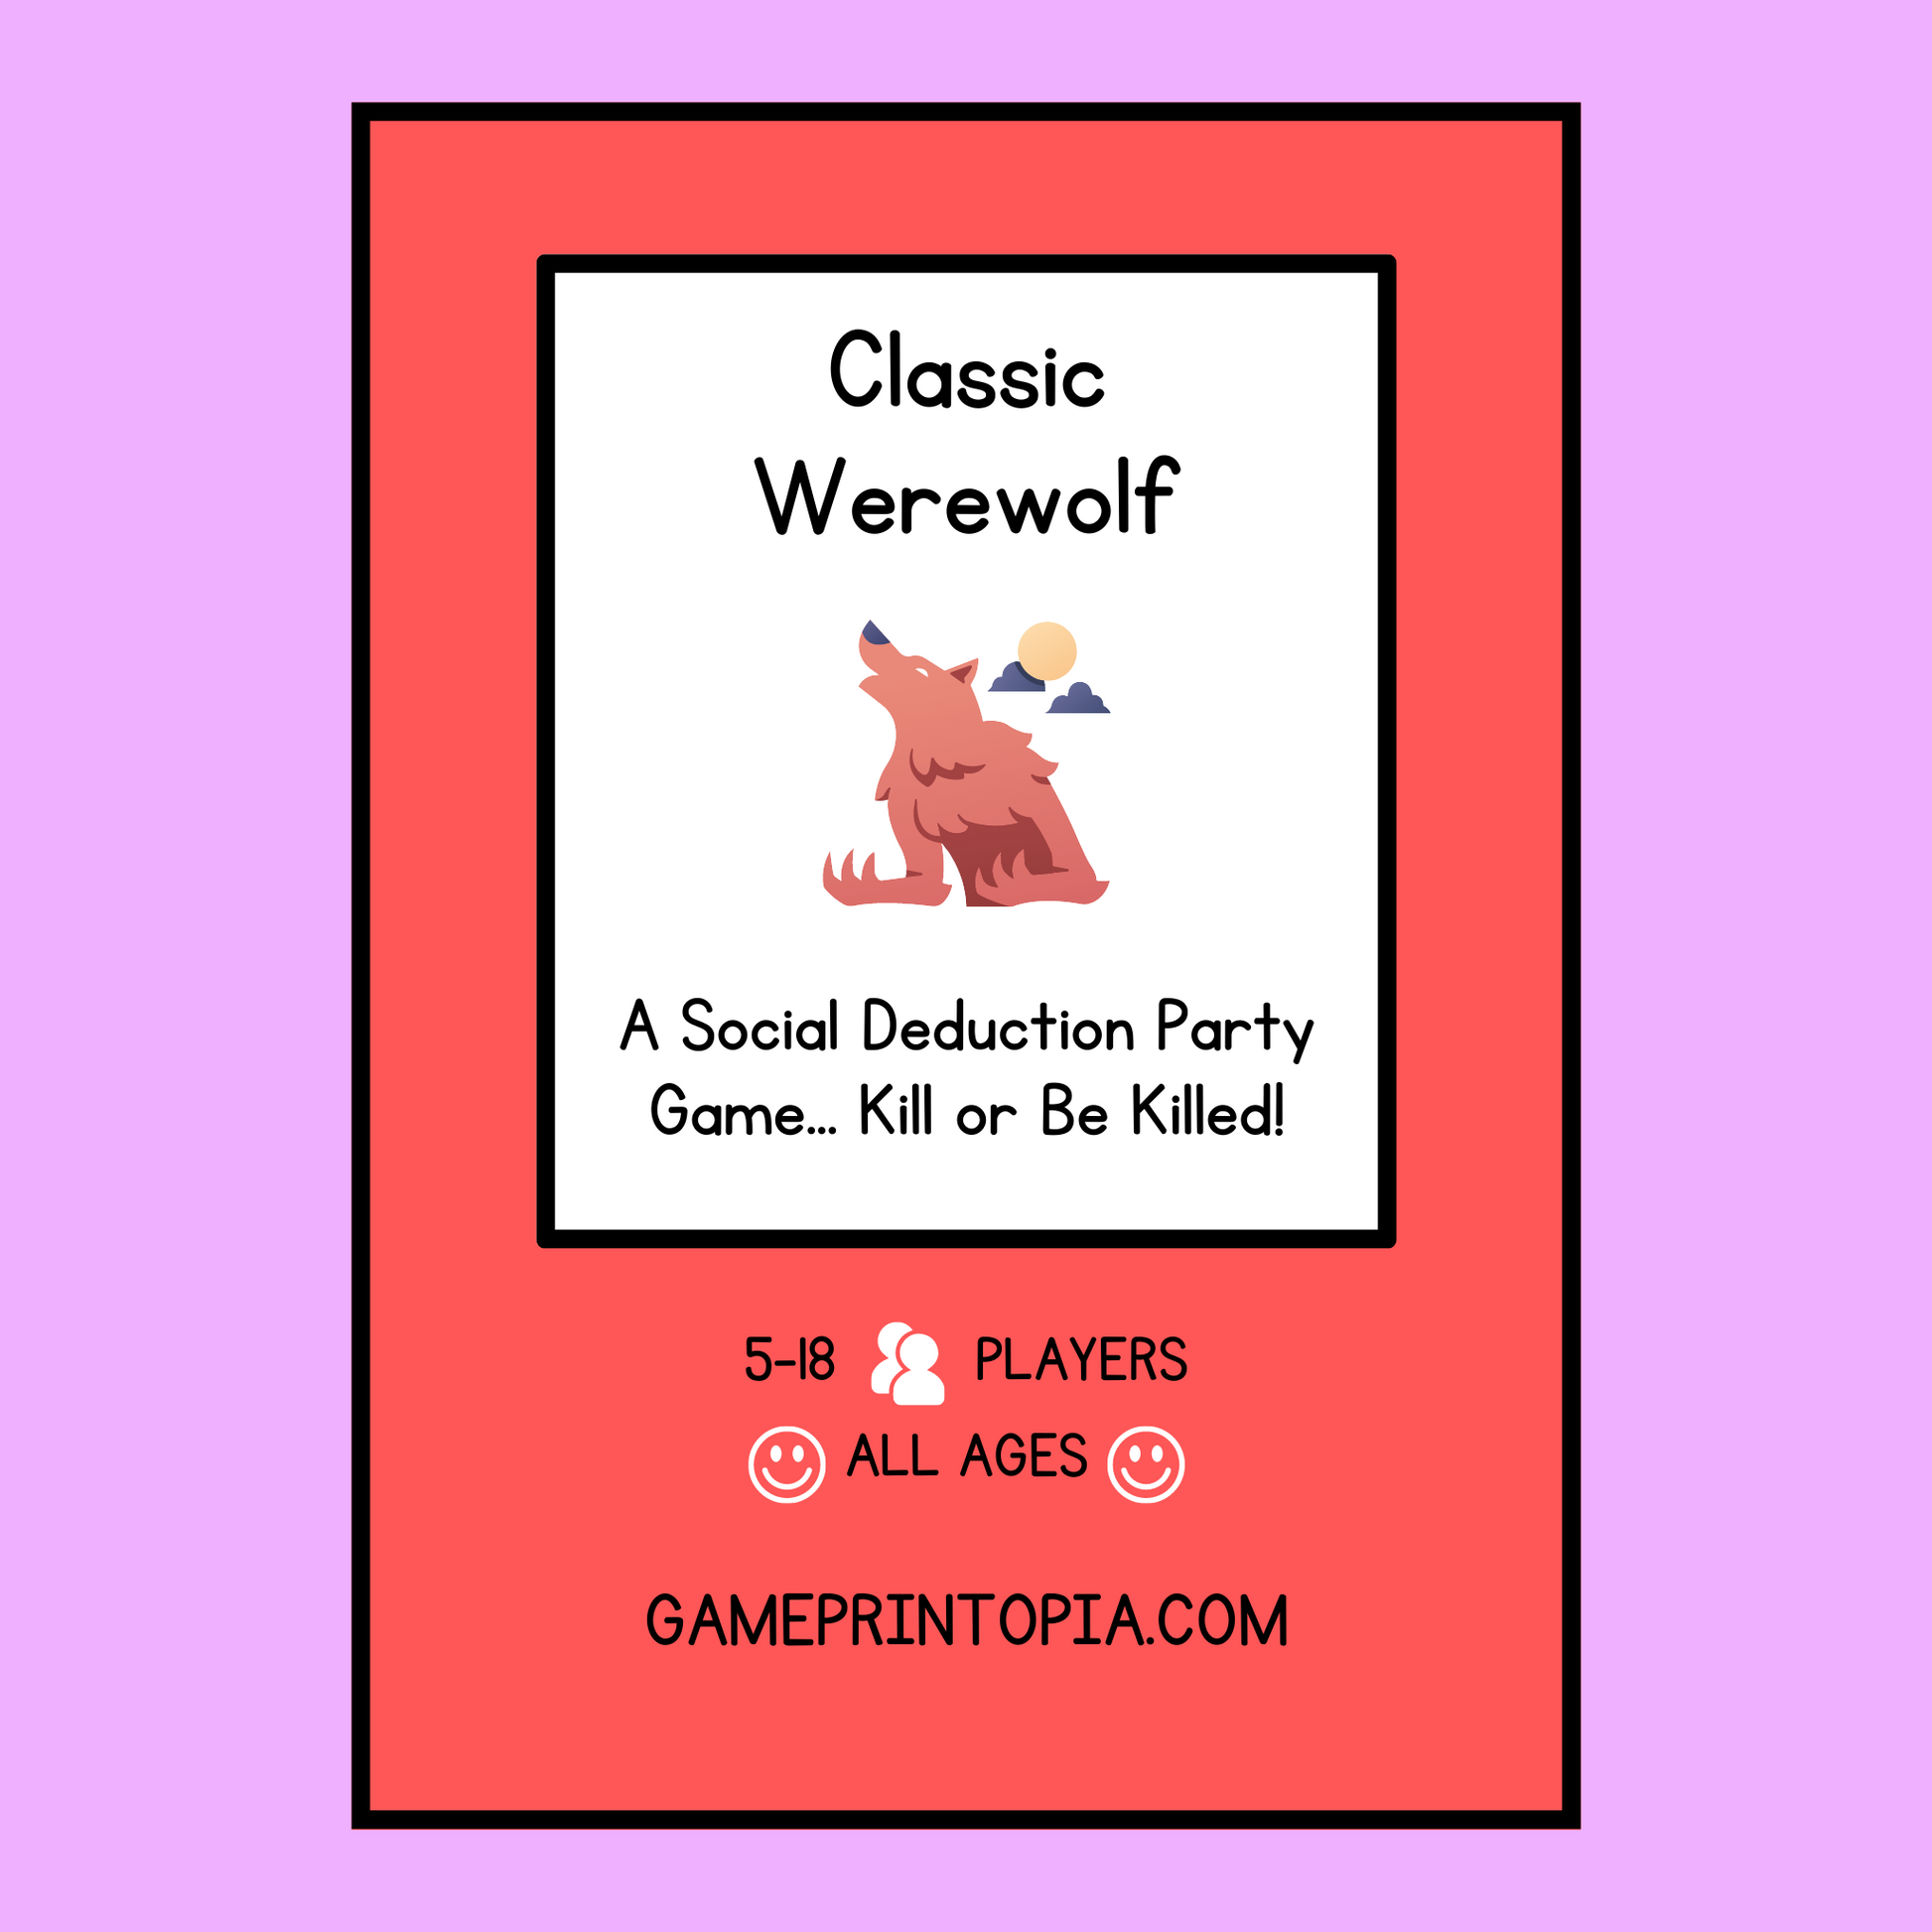 Cover image of the "print and play" party card game Classic Werewolf, by Gameprintopi